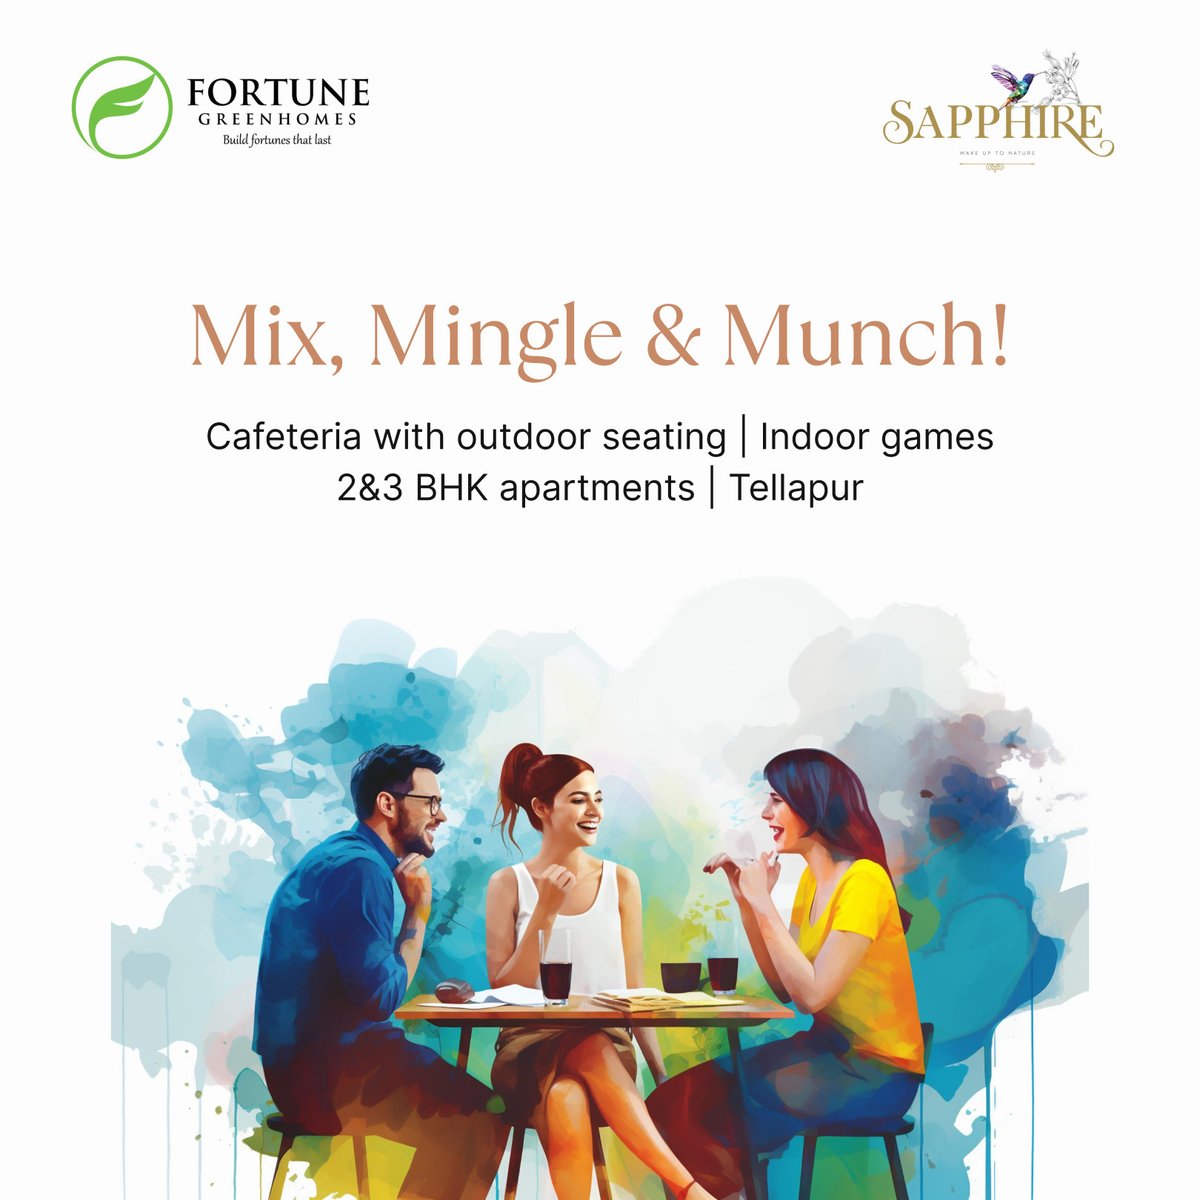 Experience cozy evenings with loved ones at Sapphire, offering a charming outdoor café, indoor games, and various recreational activities for all!

#Sapphire #FortuneGreenHomes #PremiumApartments #Tellapur #Hyderabad